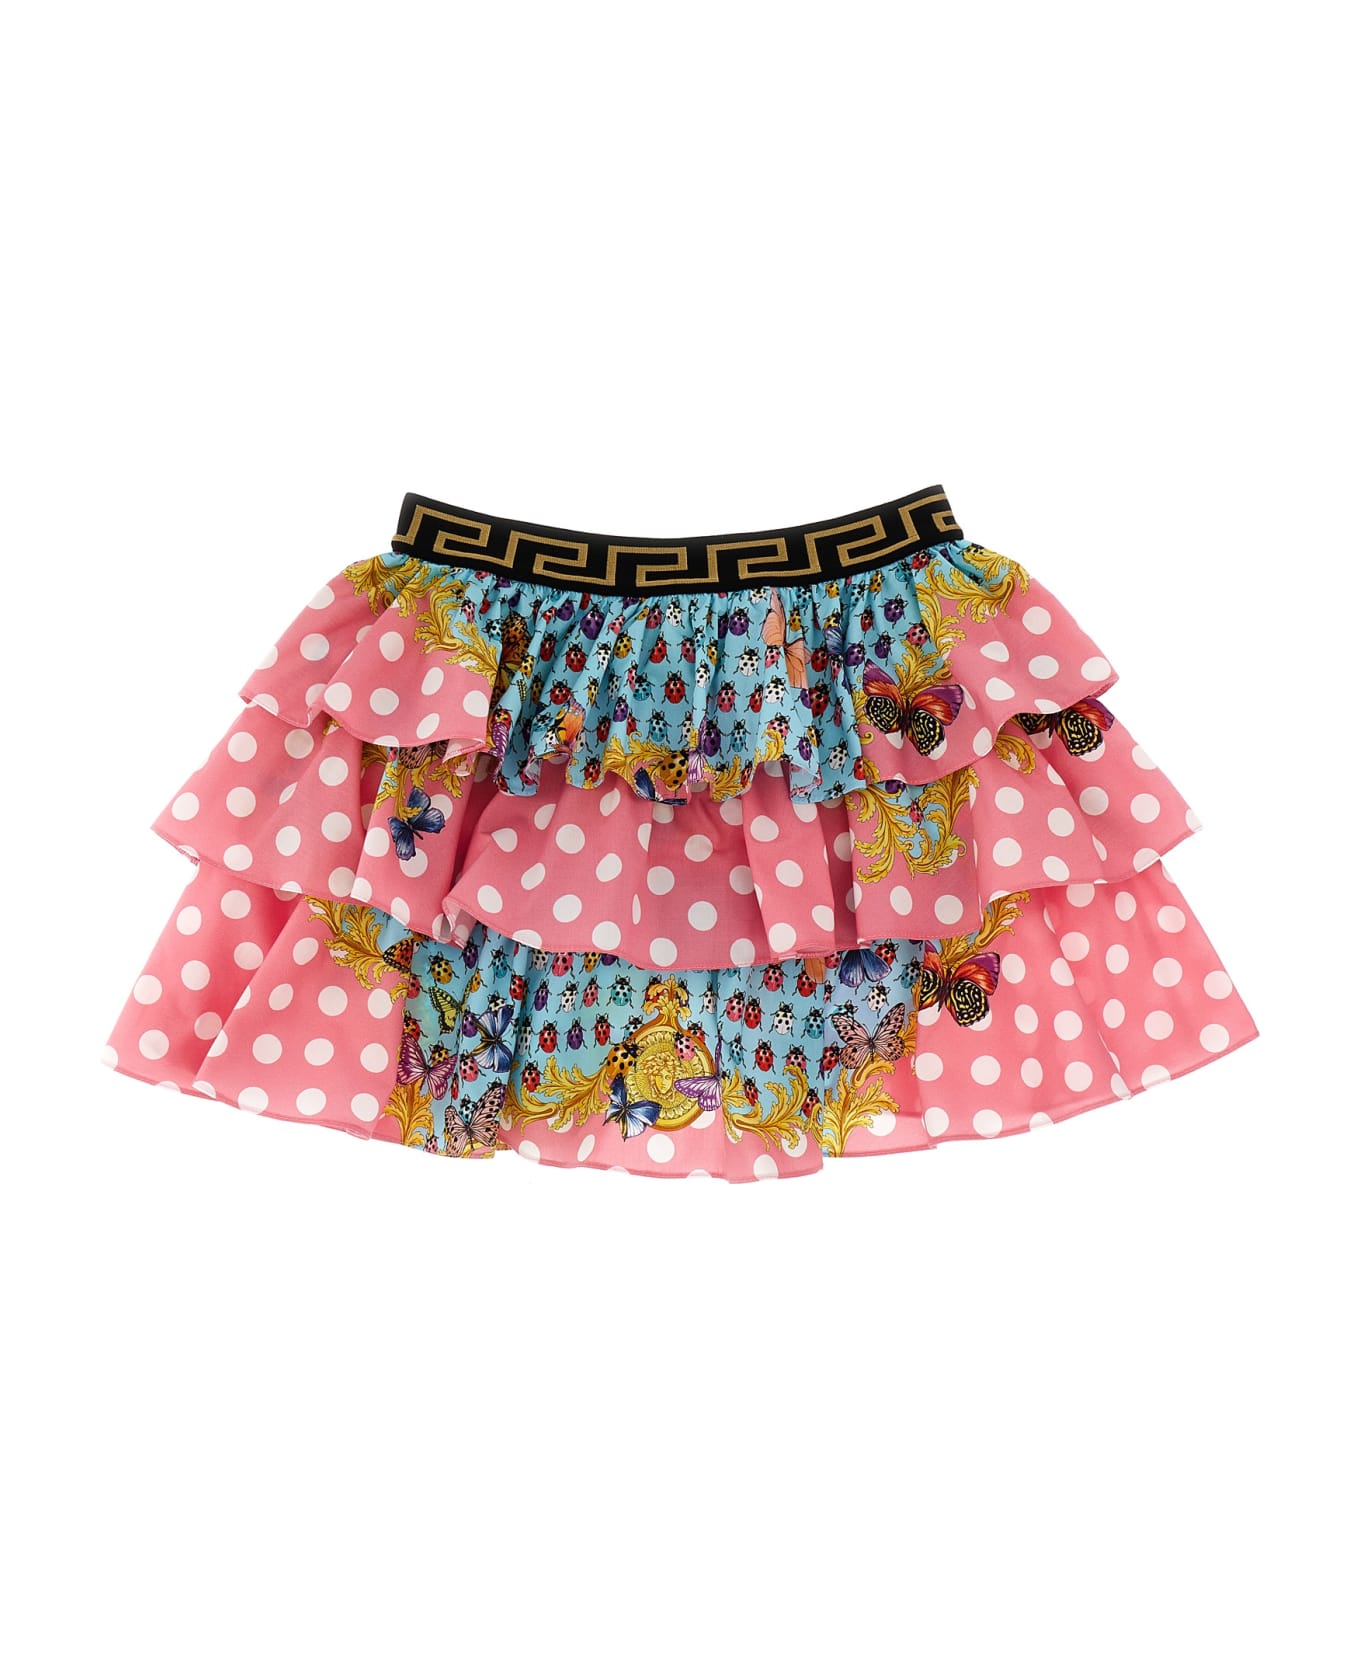 Versace Heritage Butterflies & Ladybugs Kids' Skirt With The Vacation Capsule - Multicolor ボトムス